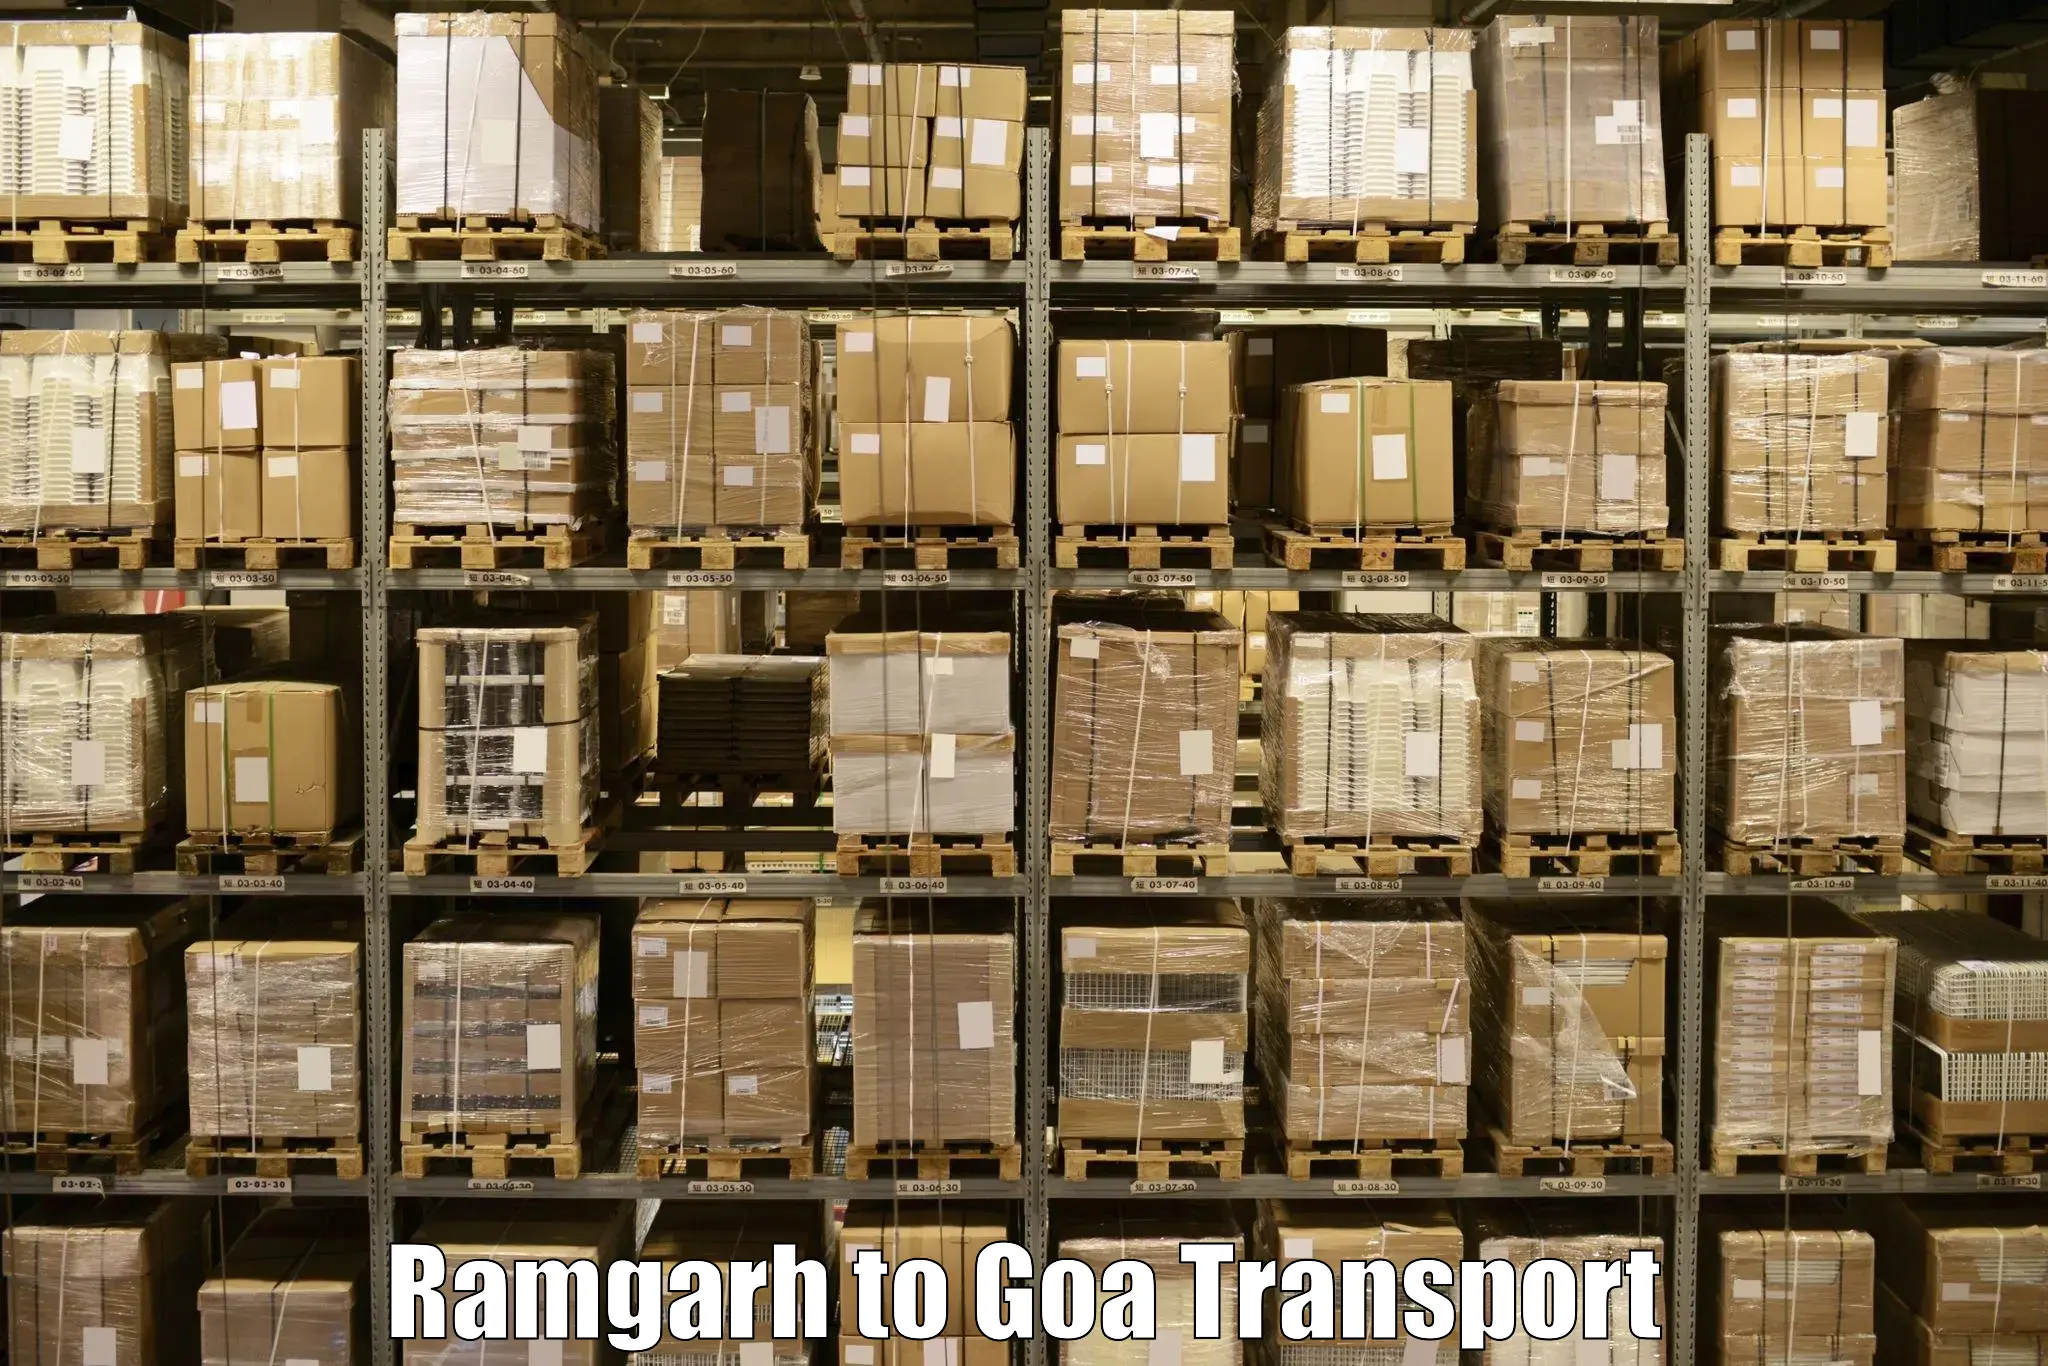 Truck transport companies in India Ramgarh to Goa